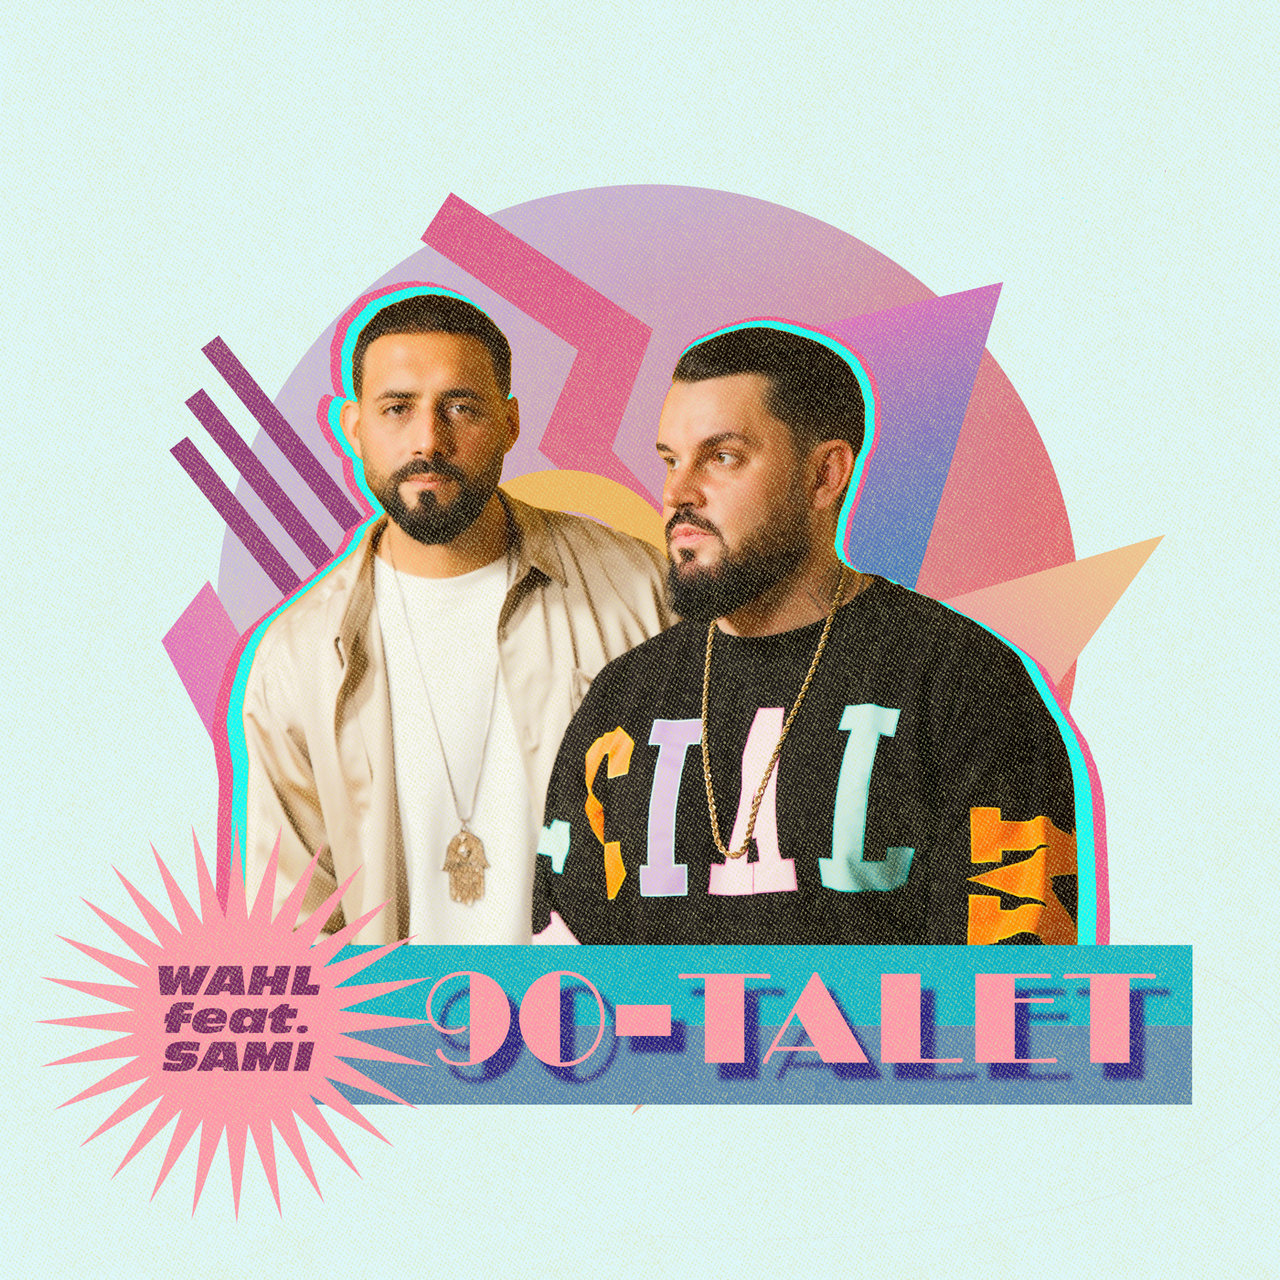 WAHL featuring SAMI — 90-talet cover artwork